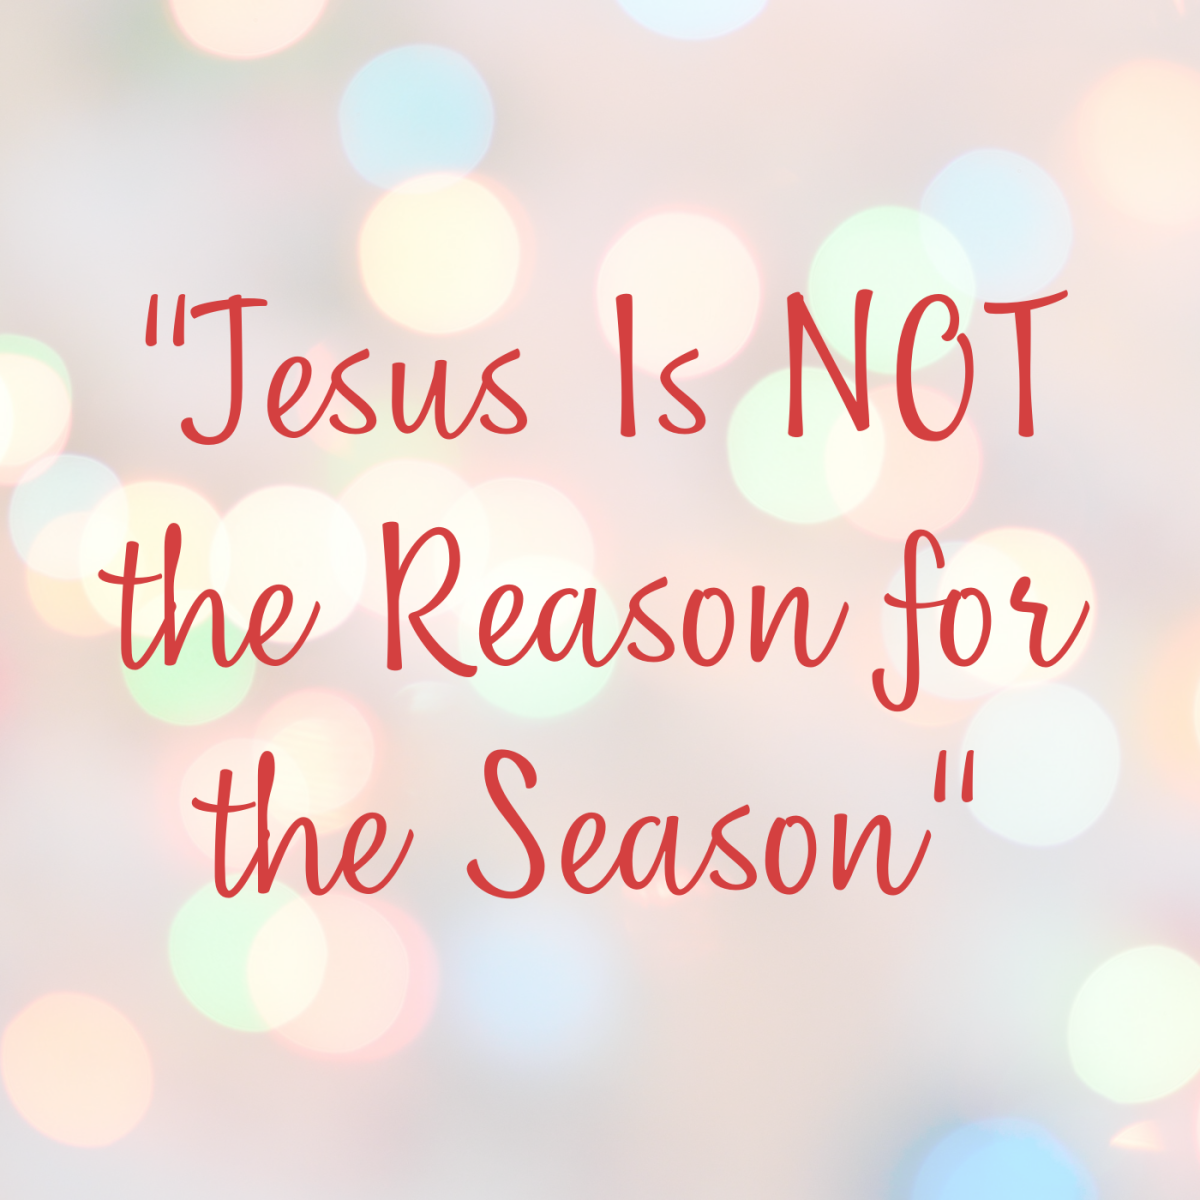 "Jesus is NOT the reason for the season."